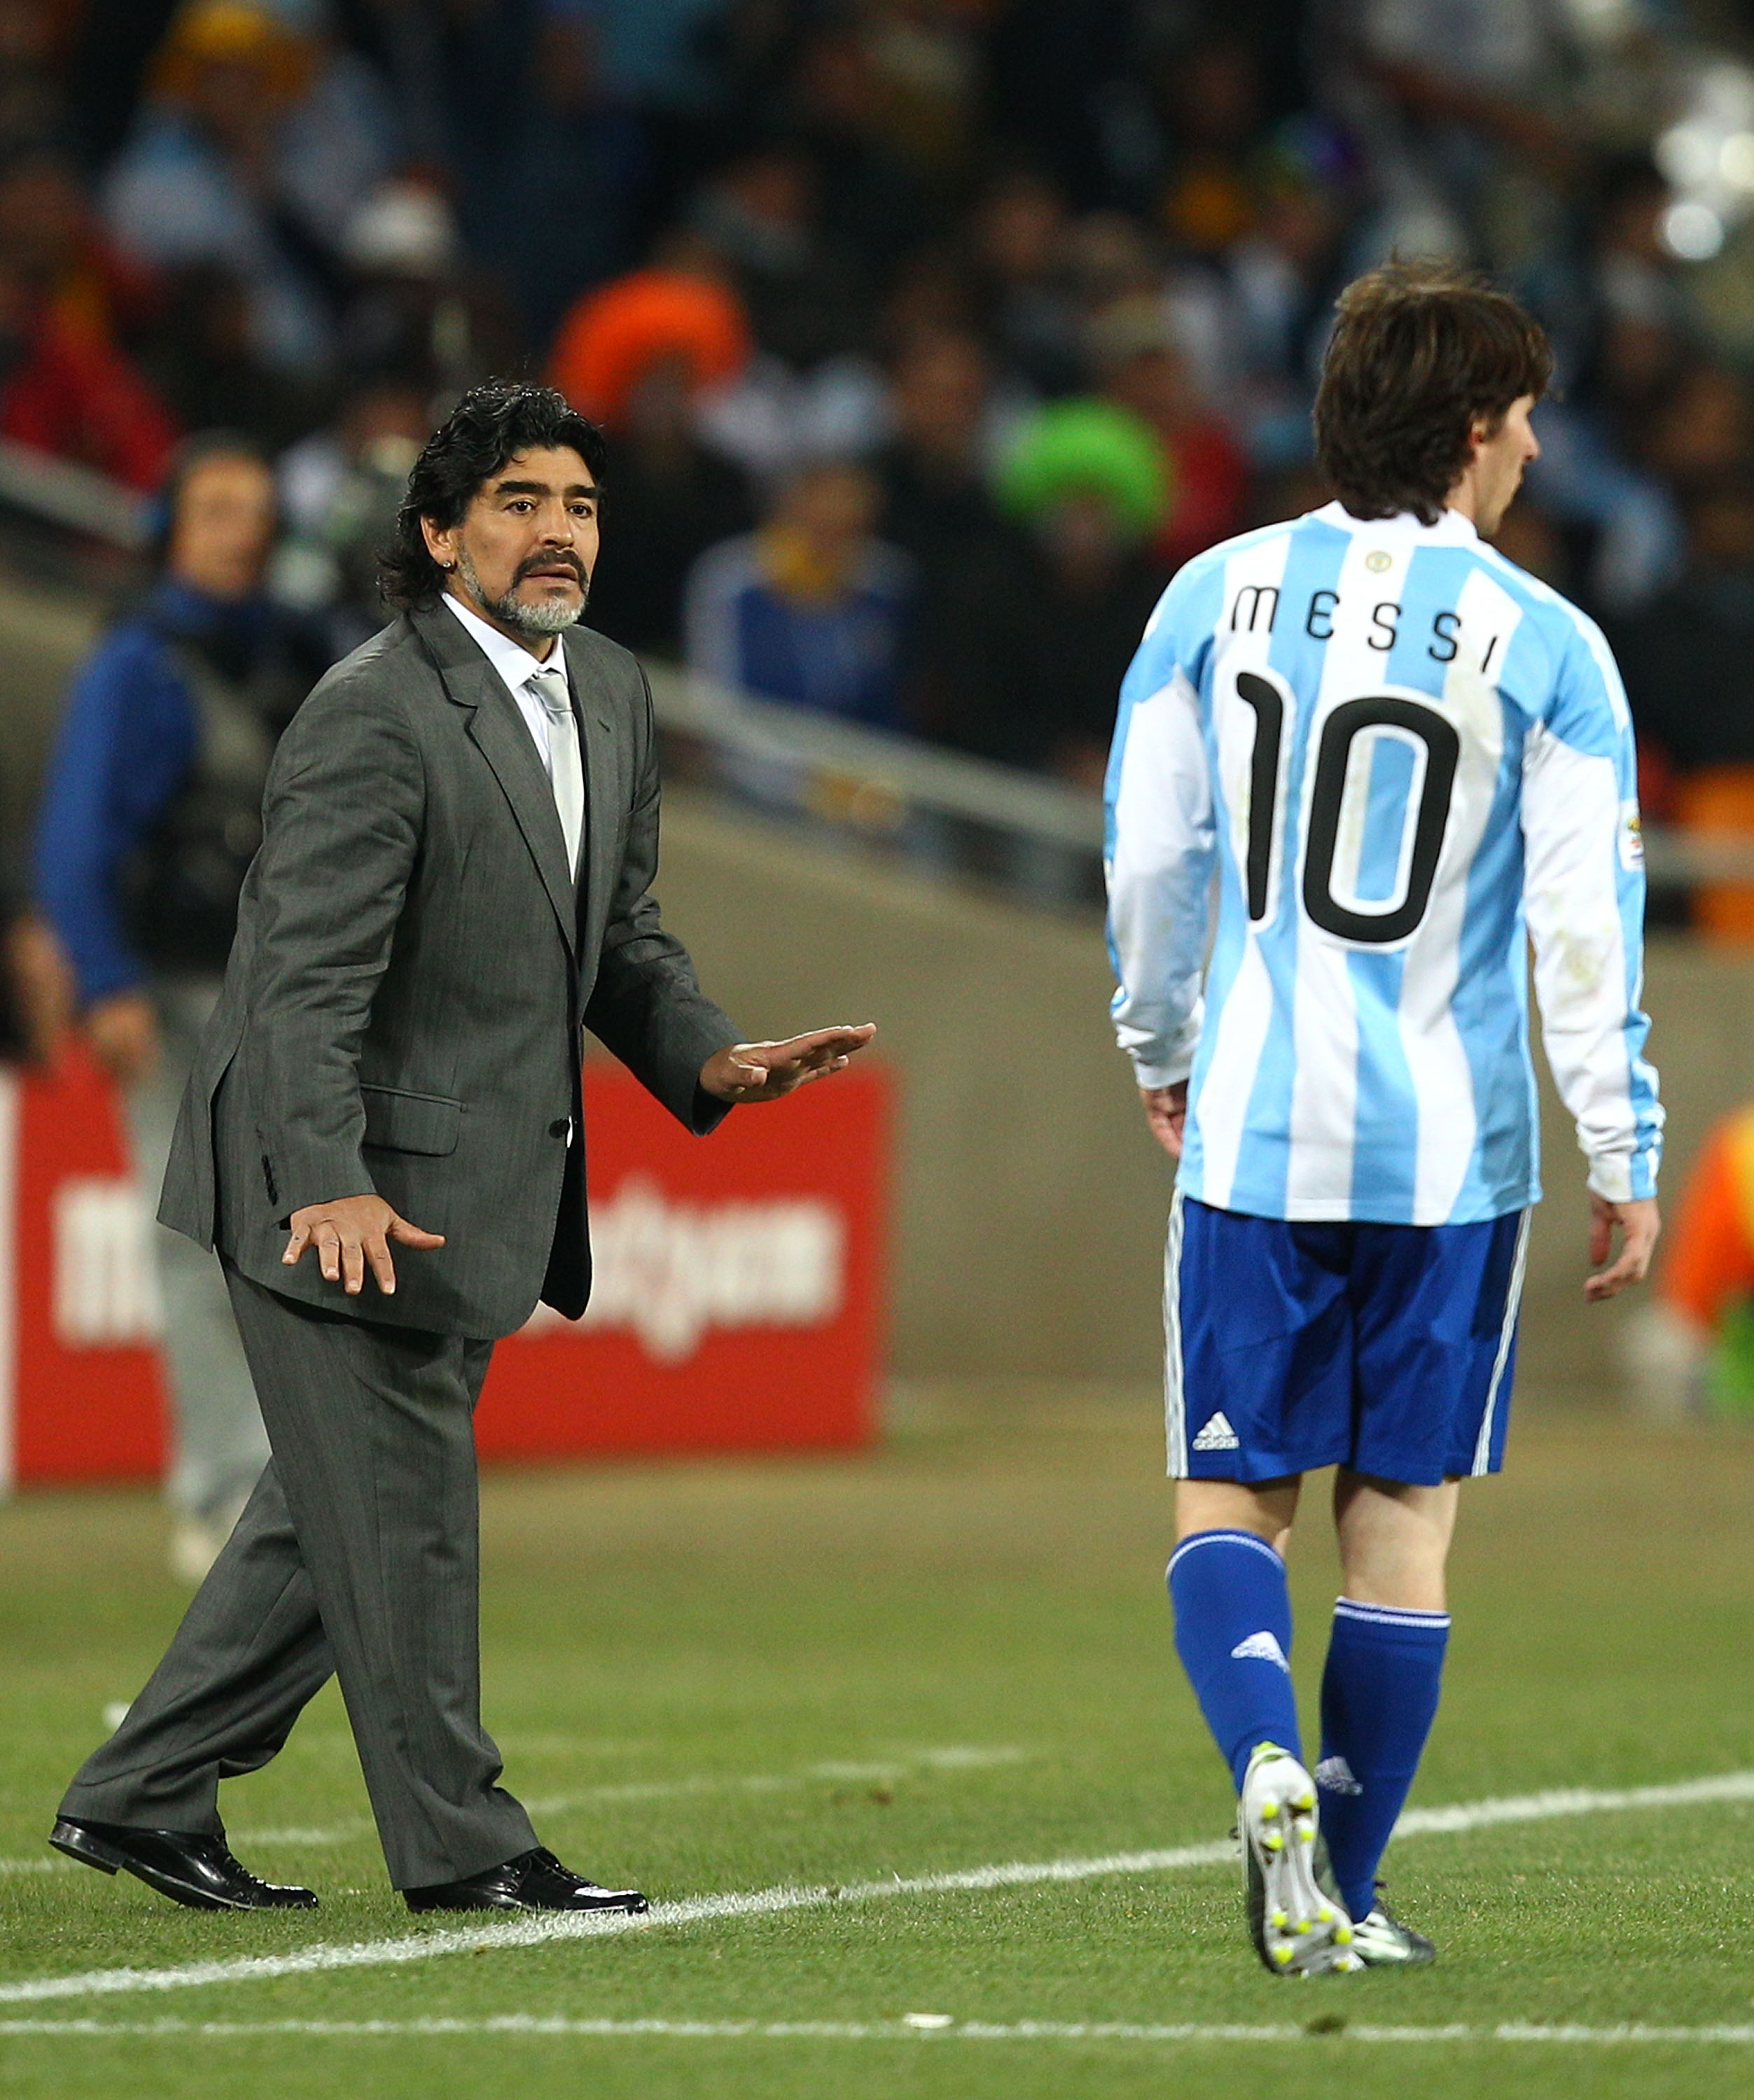 JOHANNESBURG, SOUTH AFRICA - JUNE 27:  Diego Maradona head coach of Argentina gestures to Lionel Messi of Argentina during the 2010 FIFA World Cup South Africa Round of Sixteen match between Argentina and Mexico at Soccer City Stadium on June 27, 2010 in 